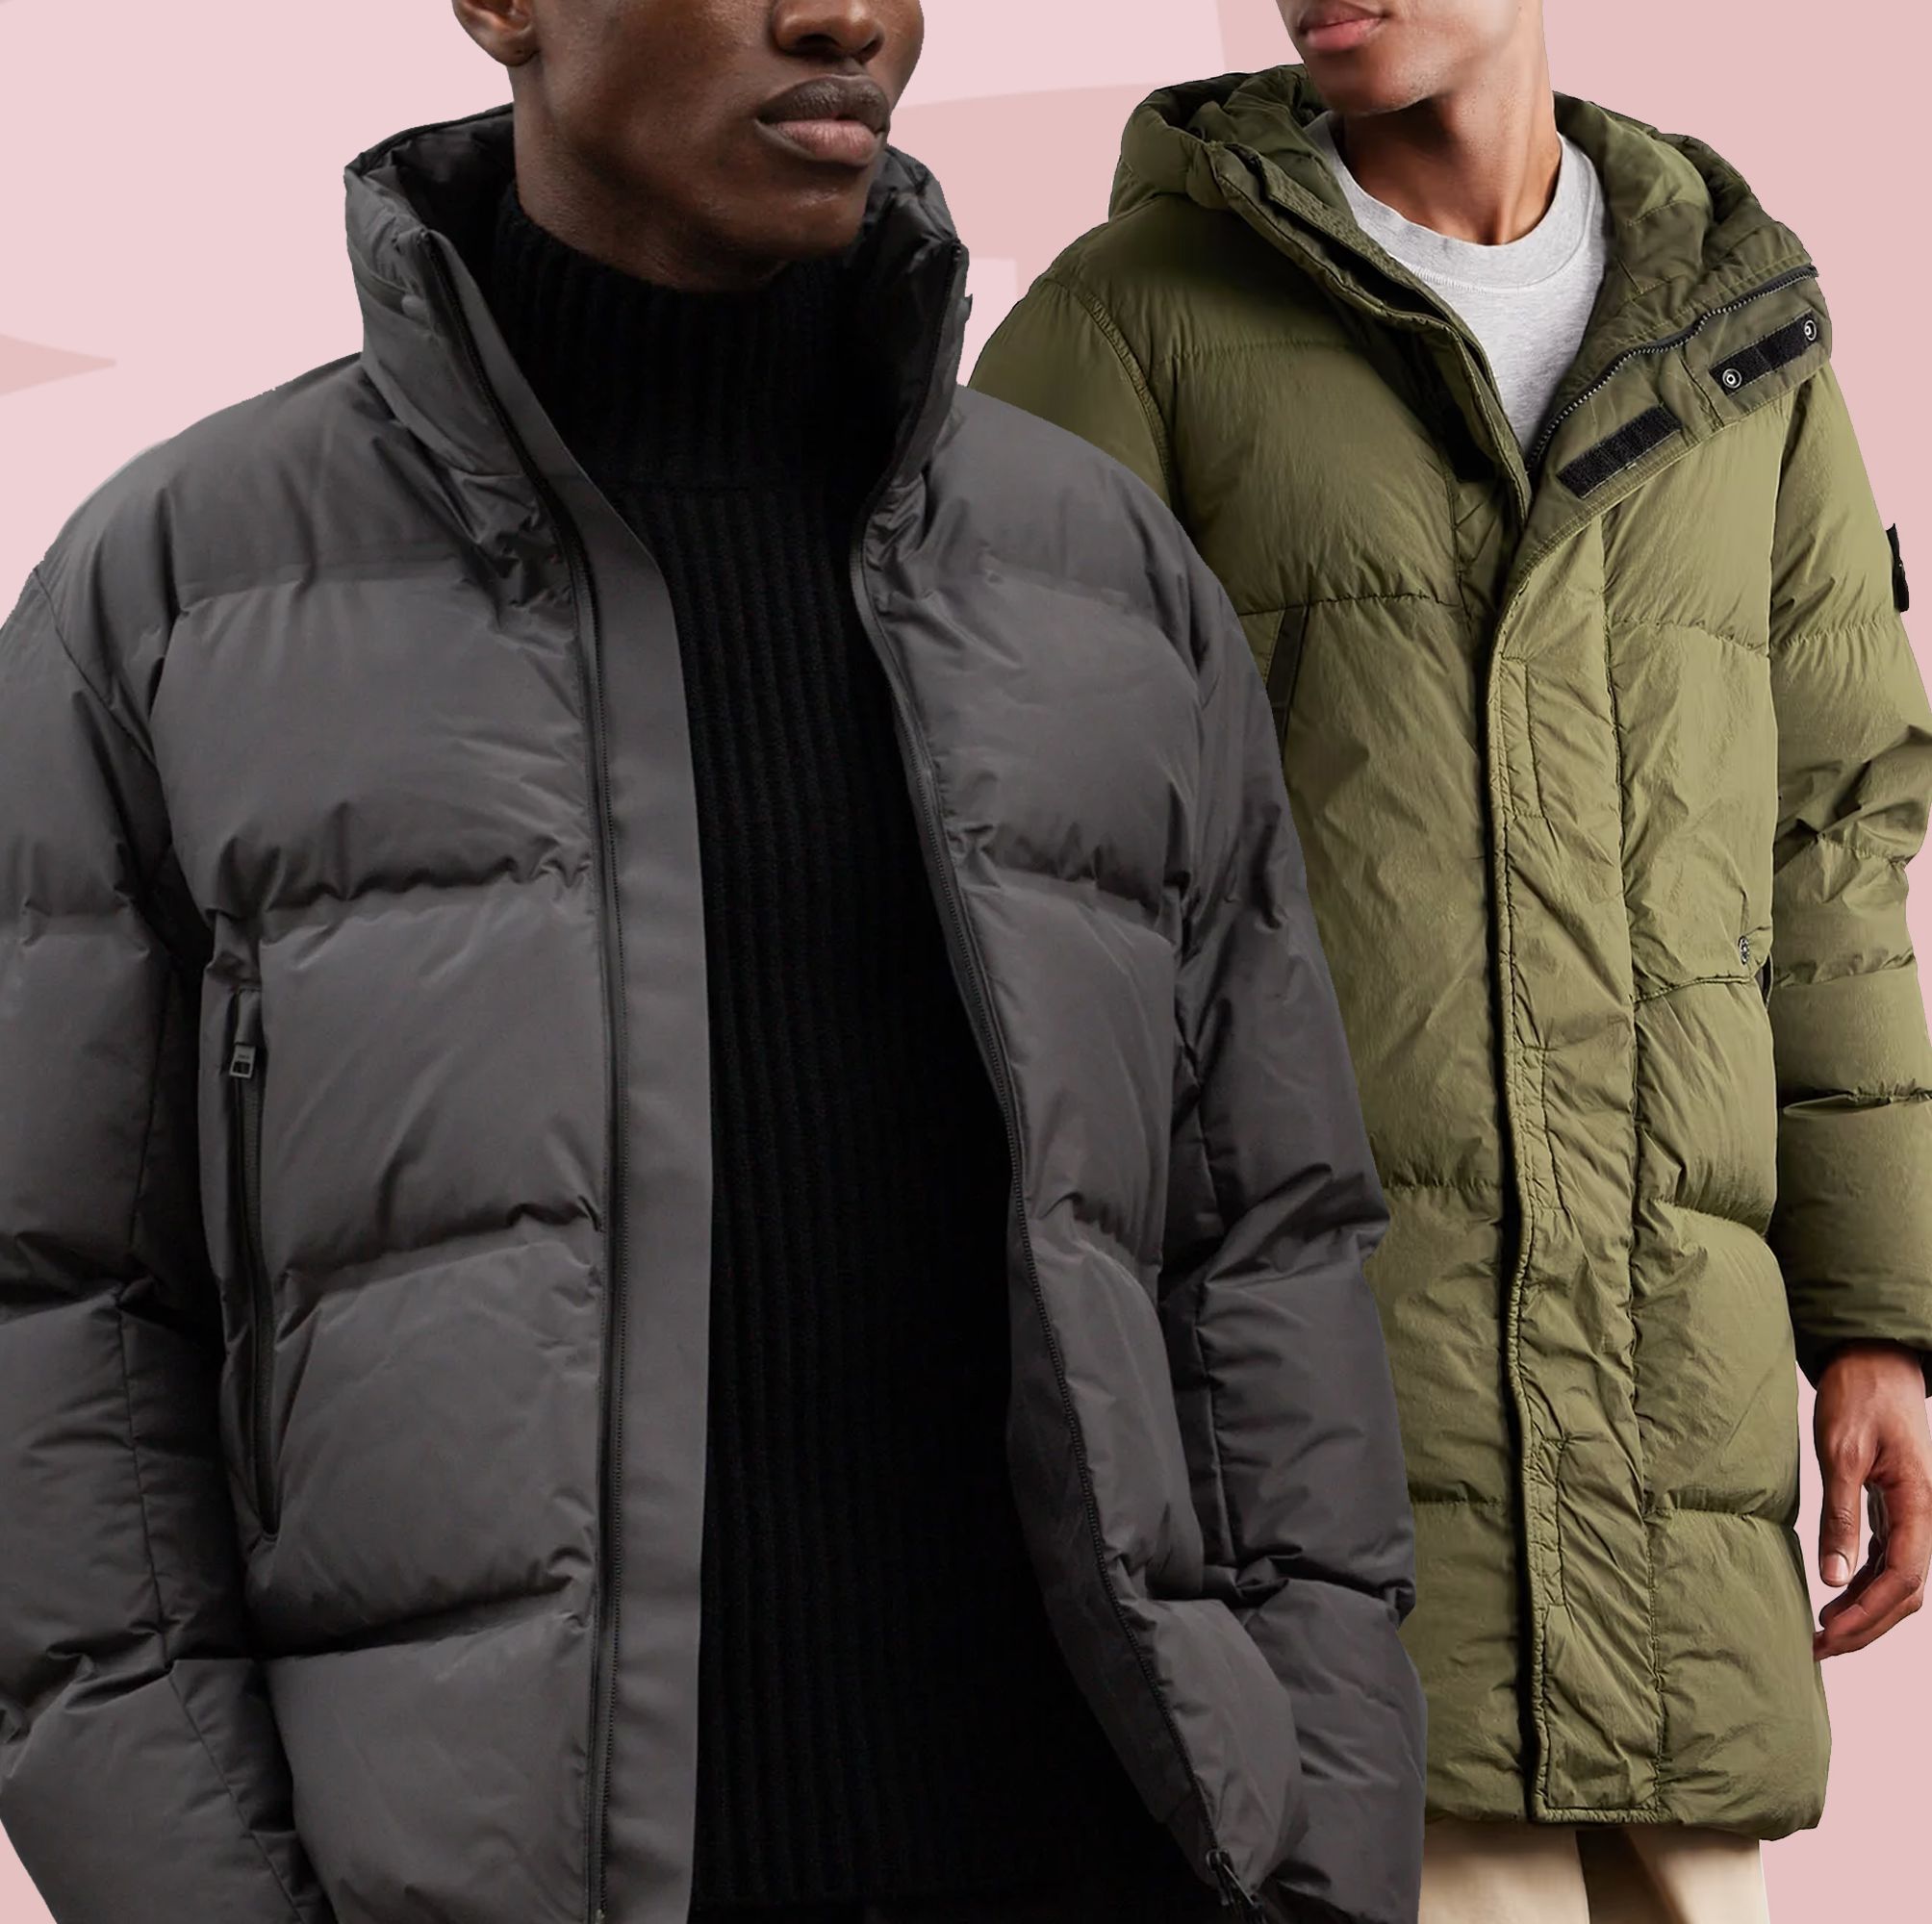 Winter Weather Has Nothing on These Down Jackets